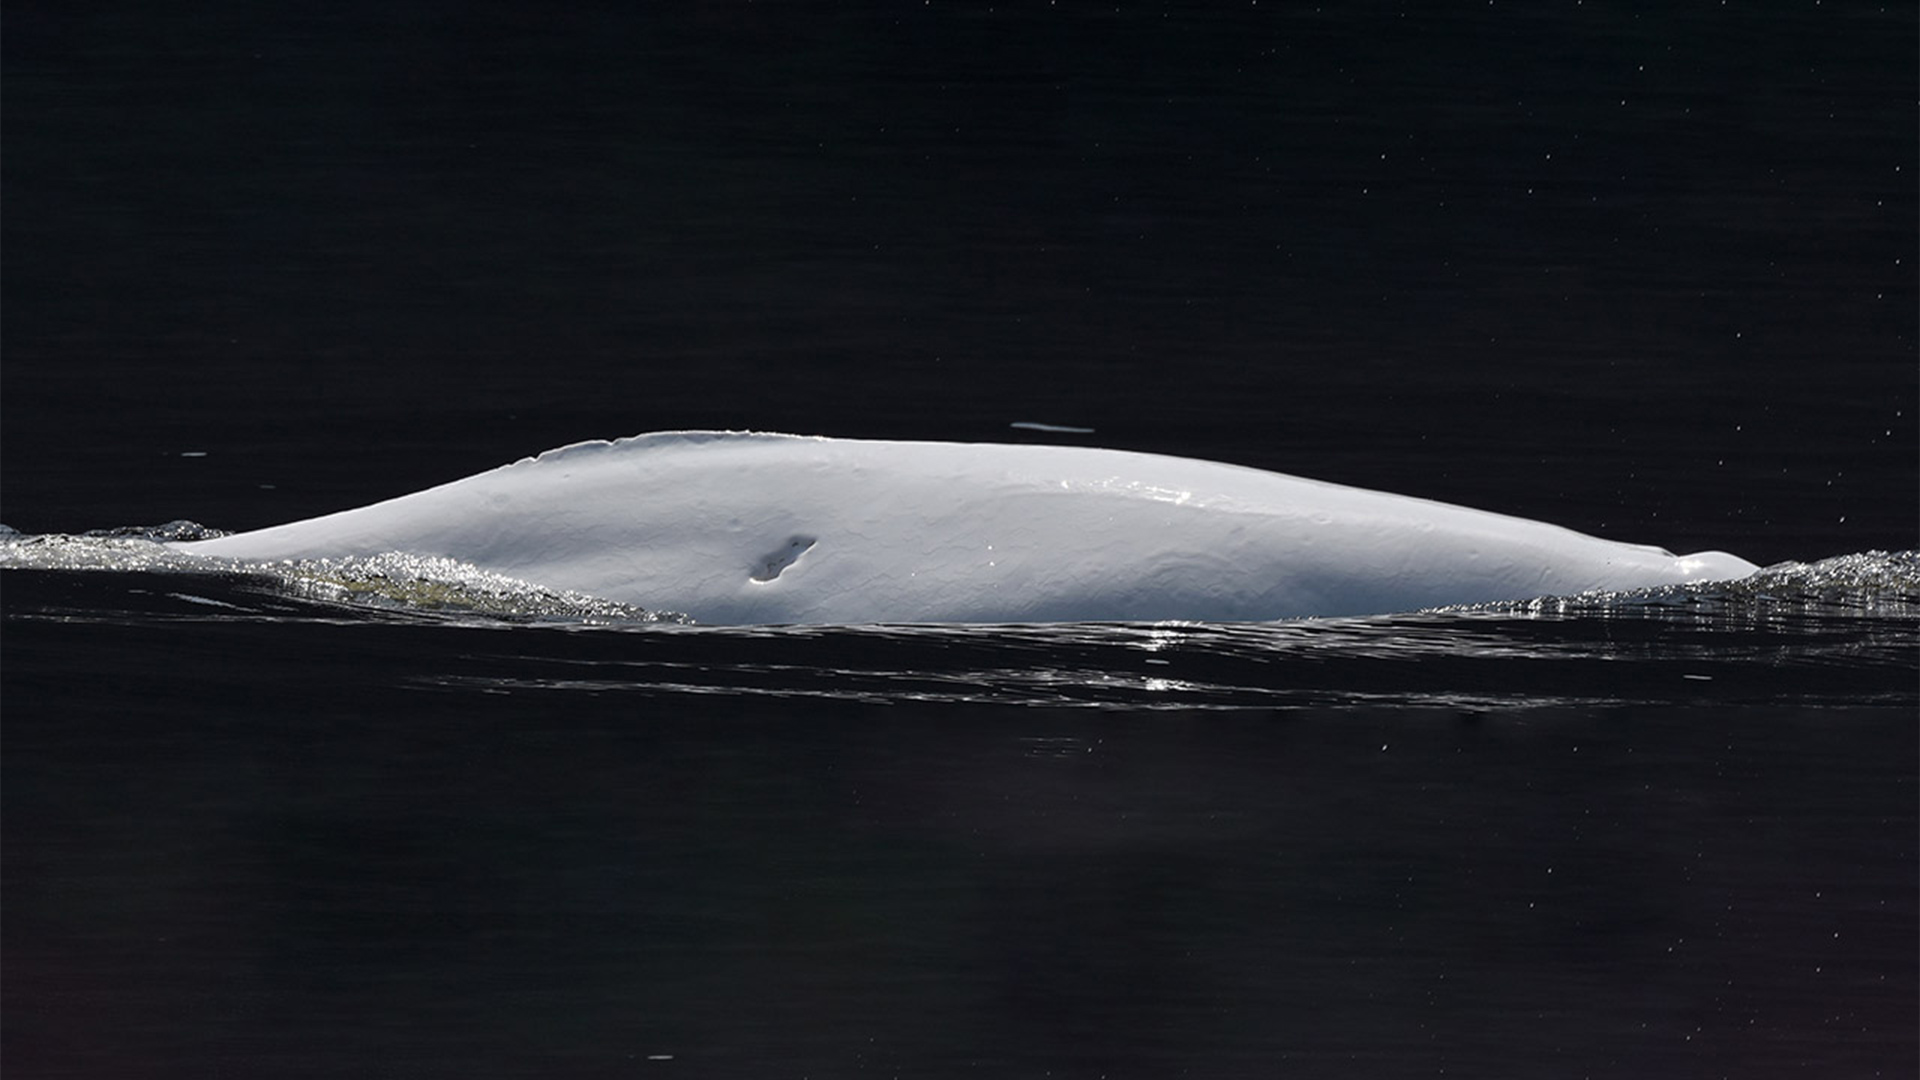 White back of a beluga. A deep scar with a jagged edge can be seen on her side.